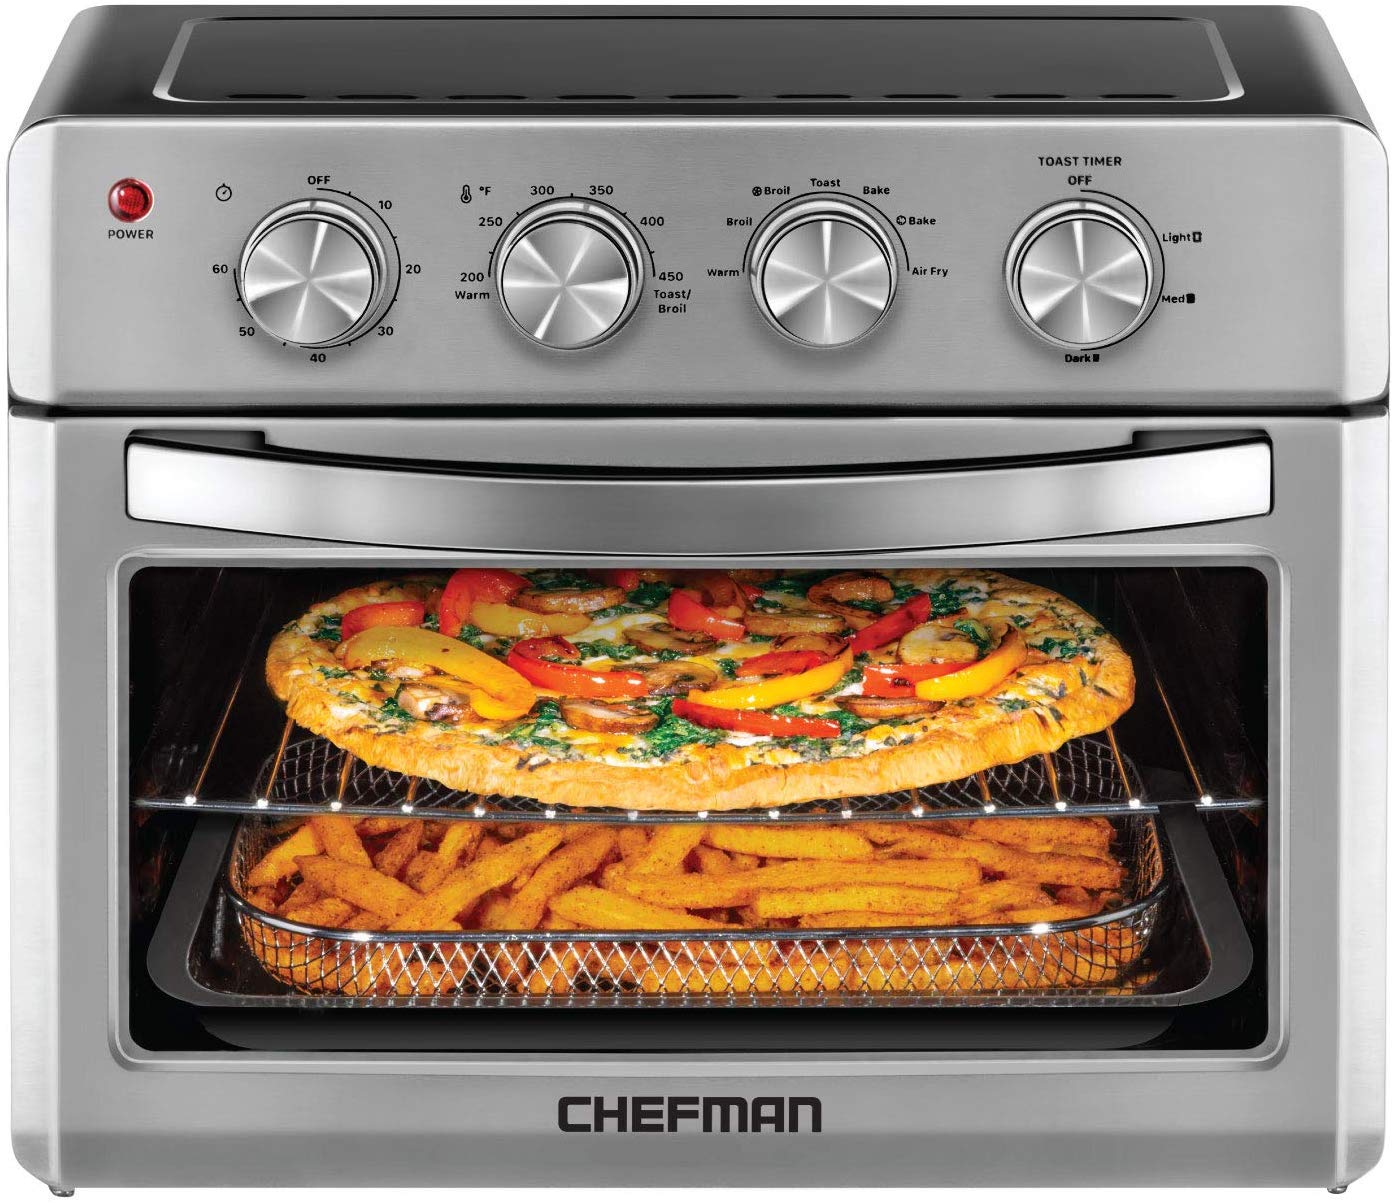 10 Best Convection Microwave Ovens in 2022 - IDSESMEDIA